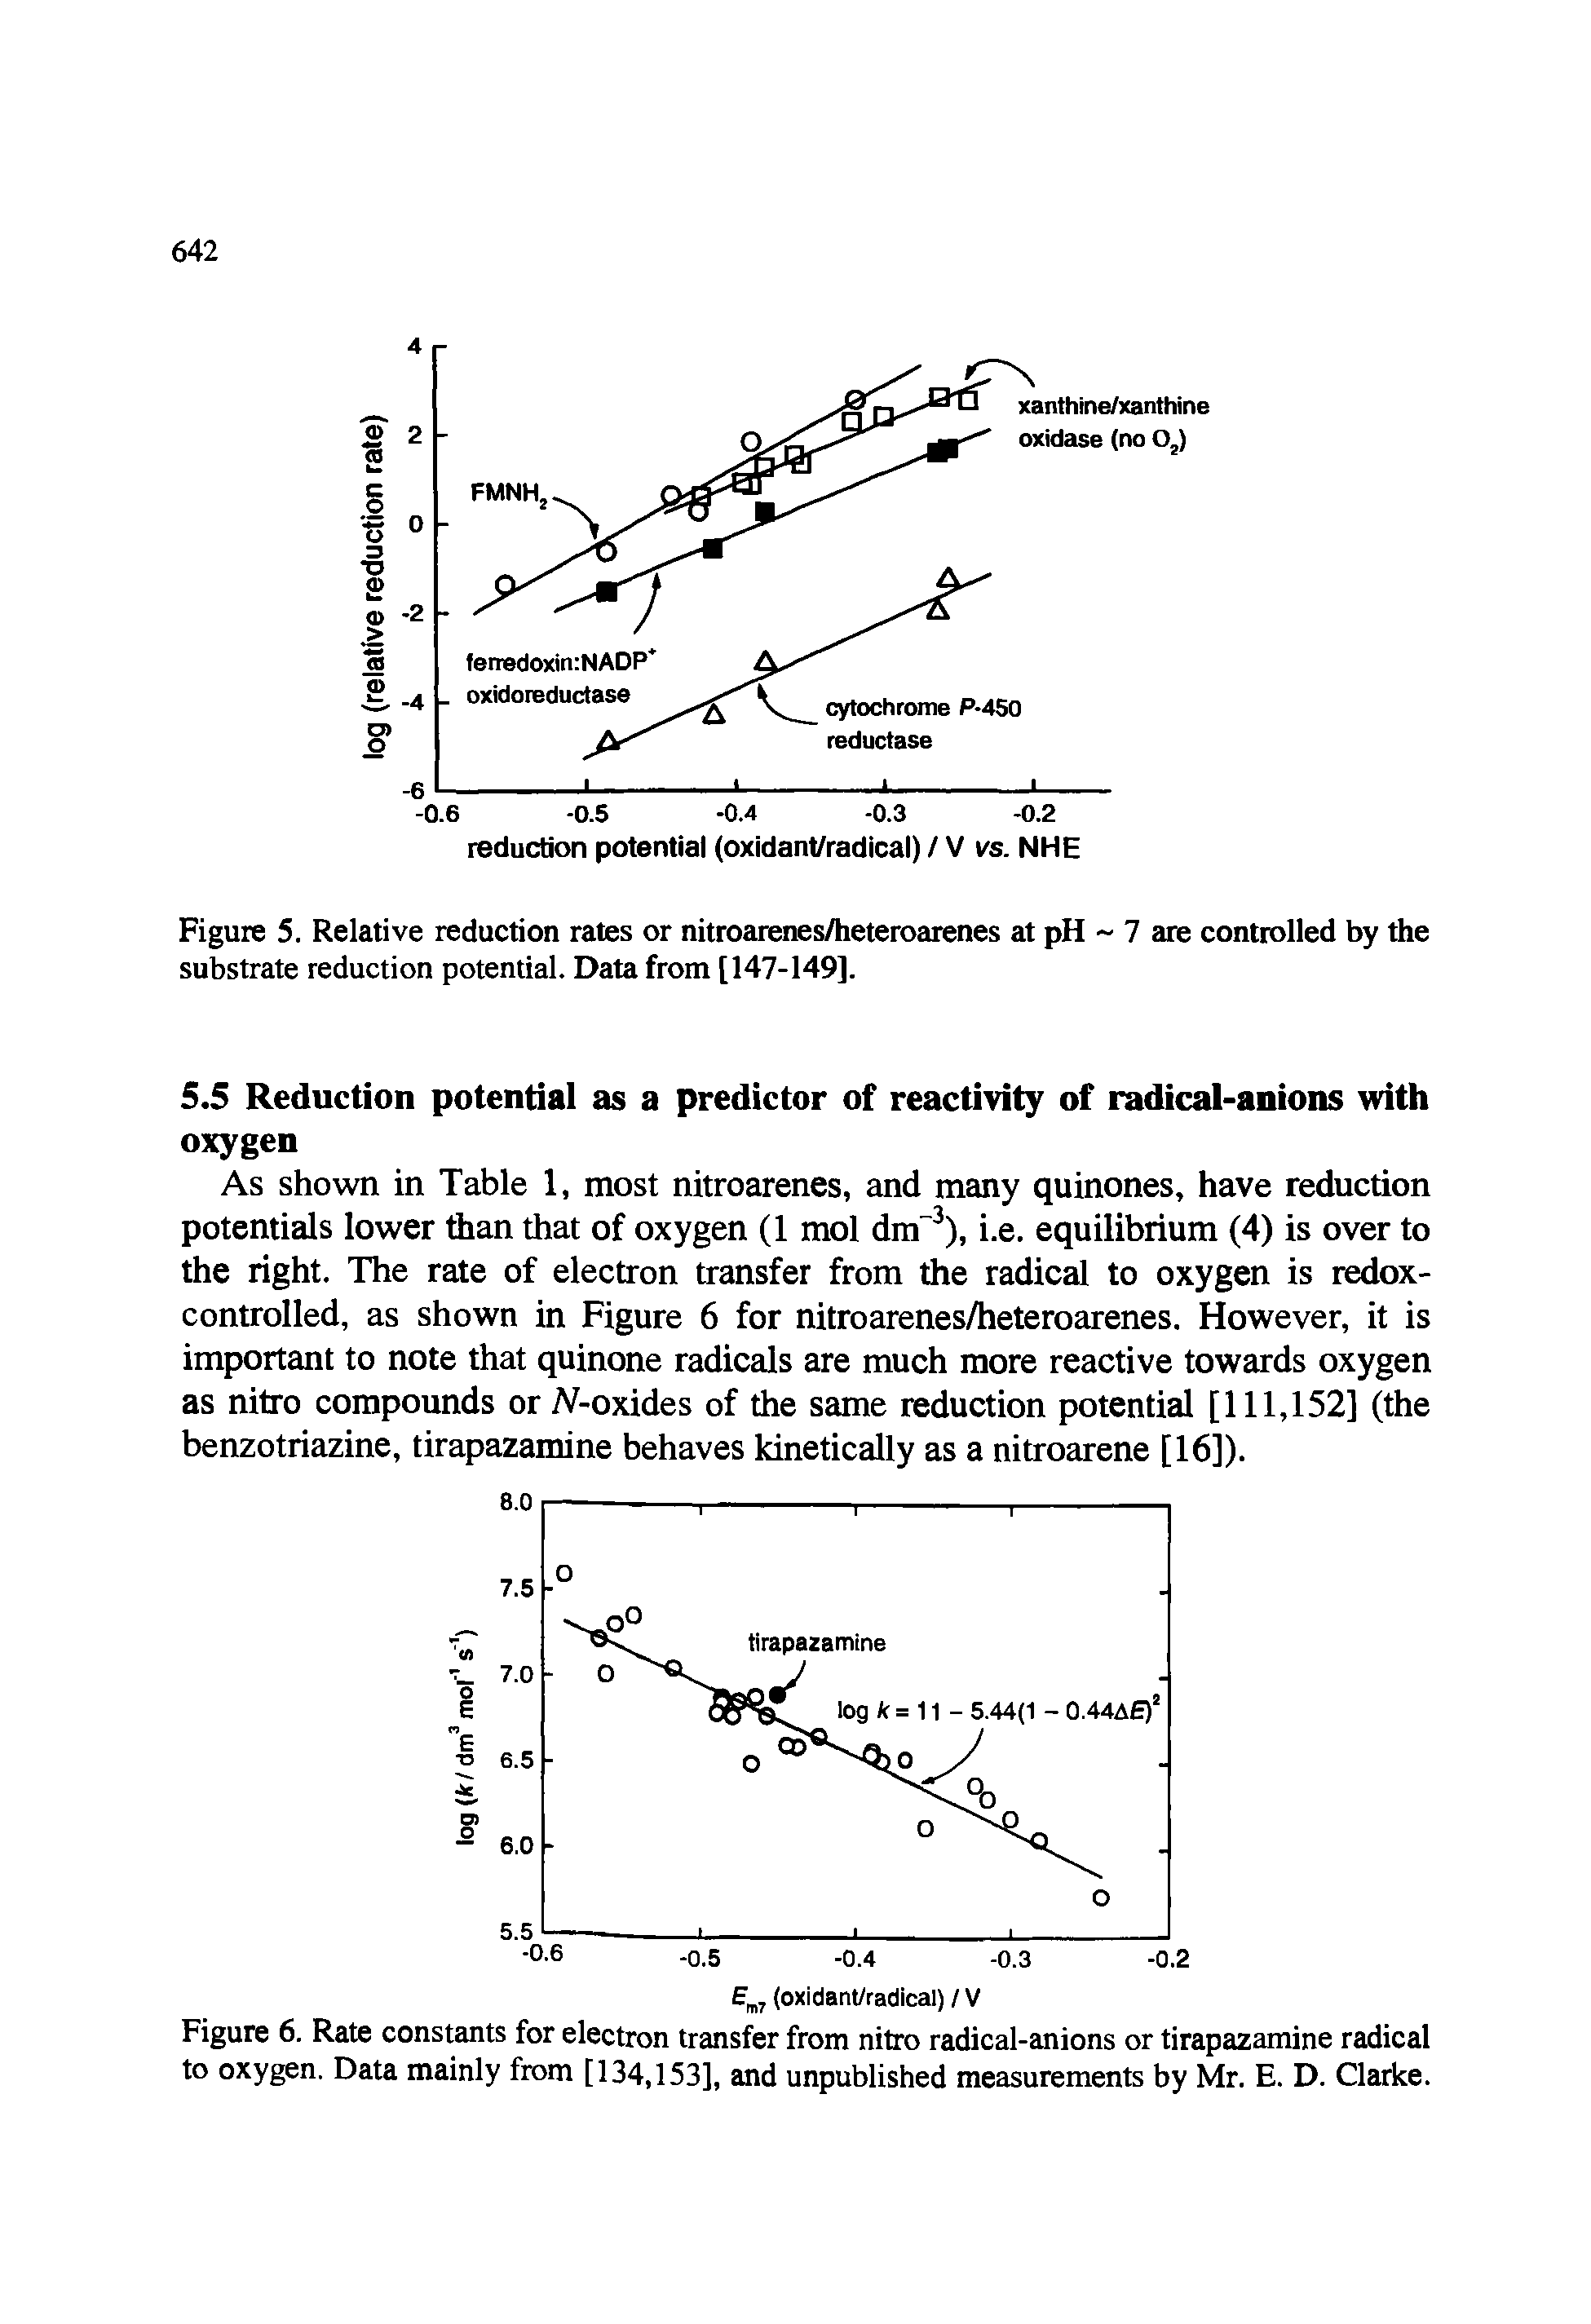 Figure 5. Relative reduction rates or nitroarenes/heteroarenes at pH 7 are controlled by the substrate reduction potential. Data from [147-149].